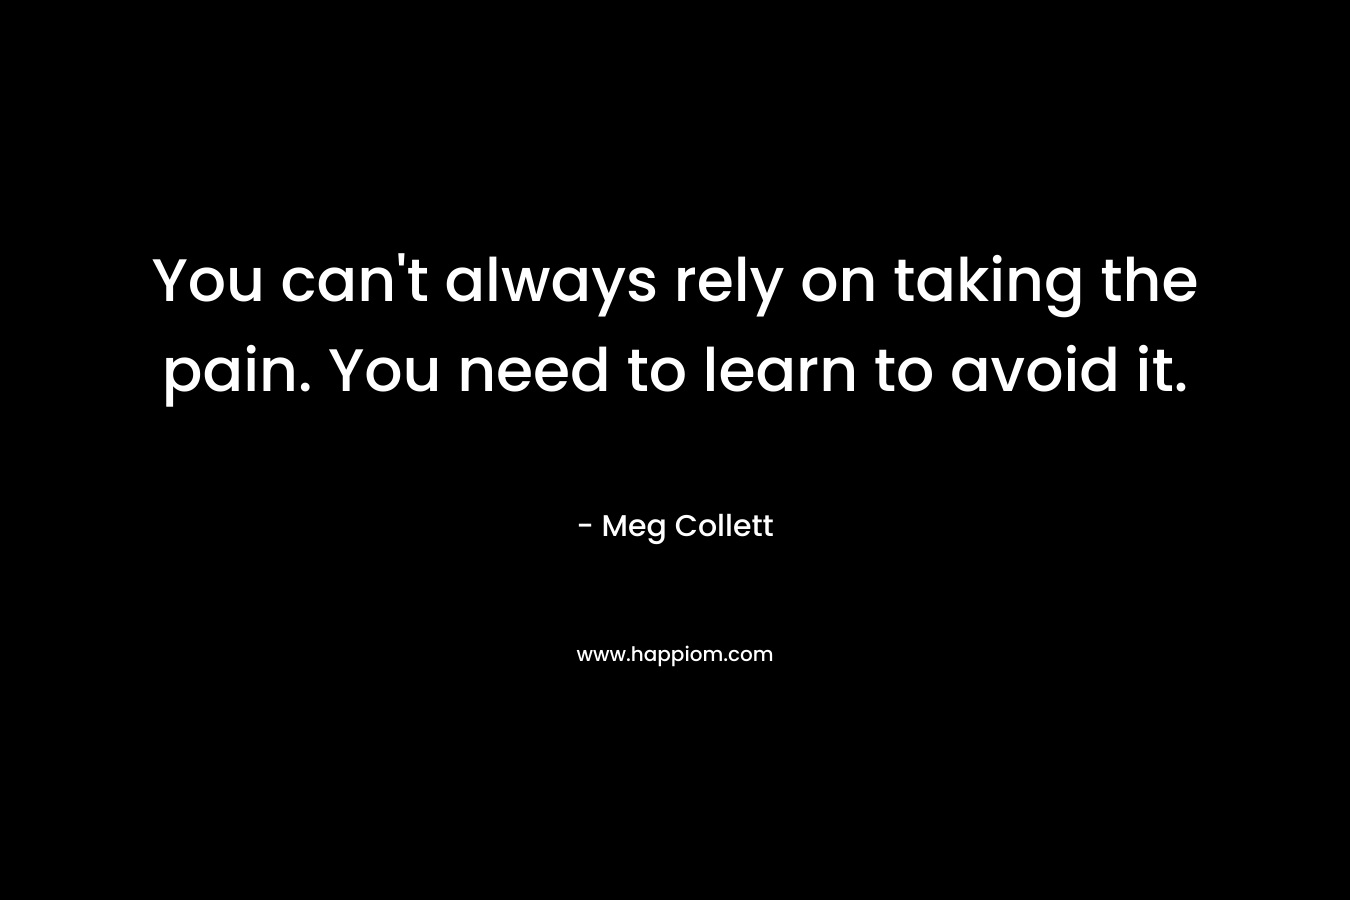 You can't always rely on taking the pain. You need to learn to avoid it.